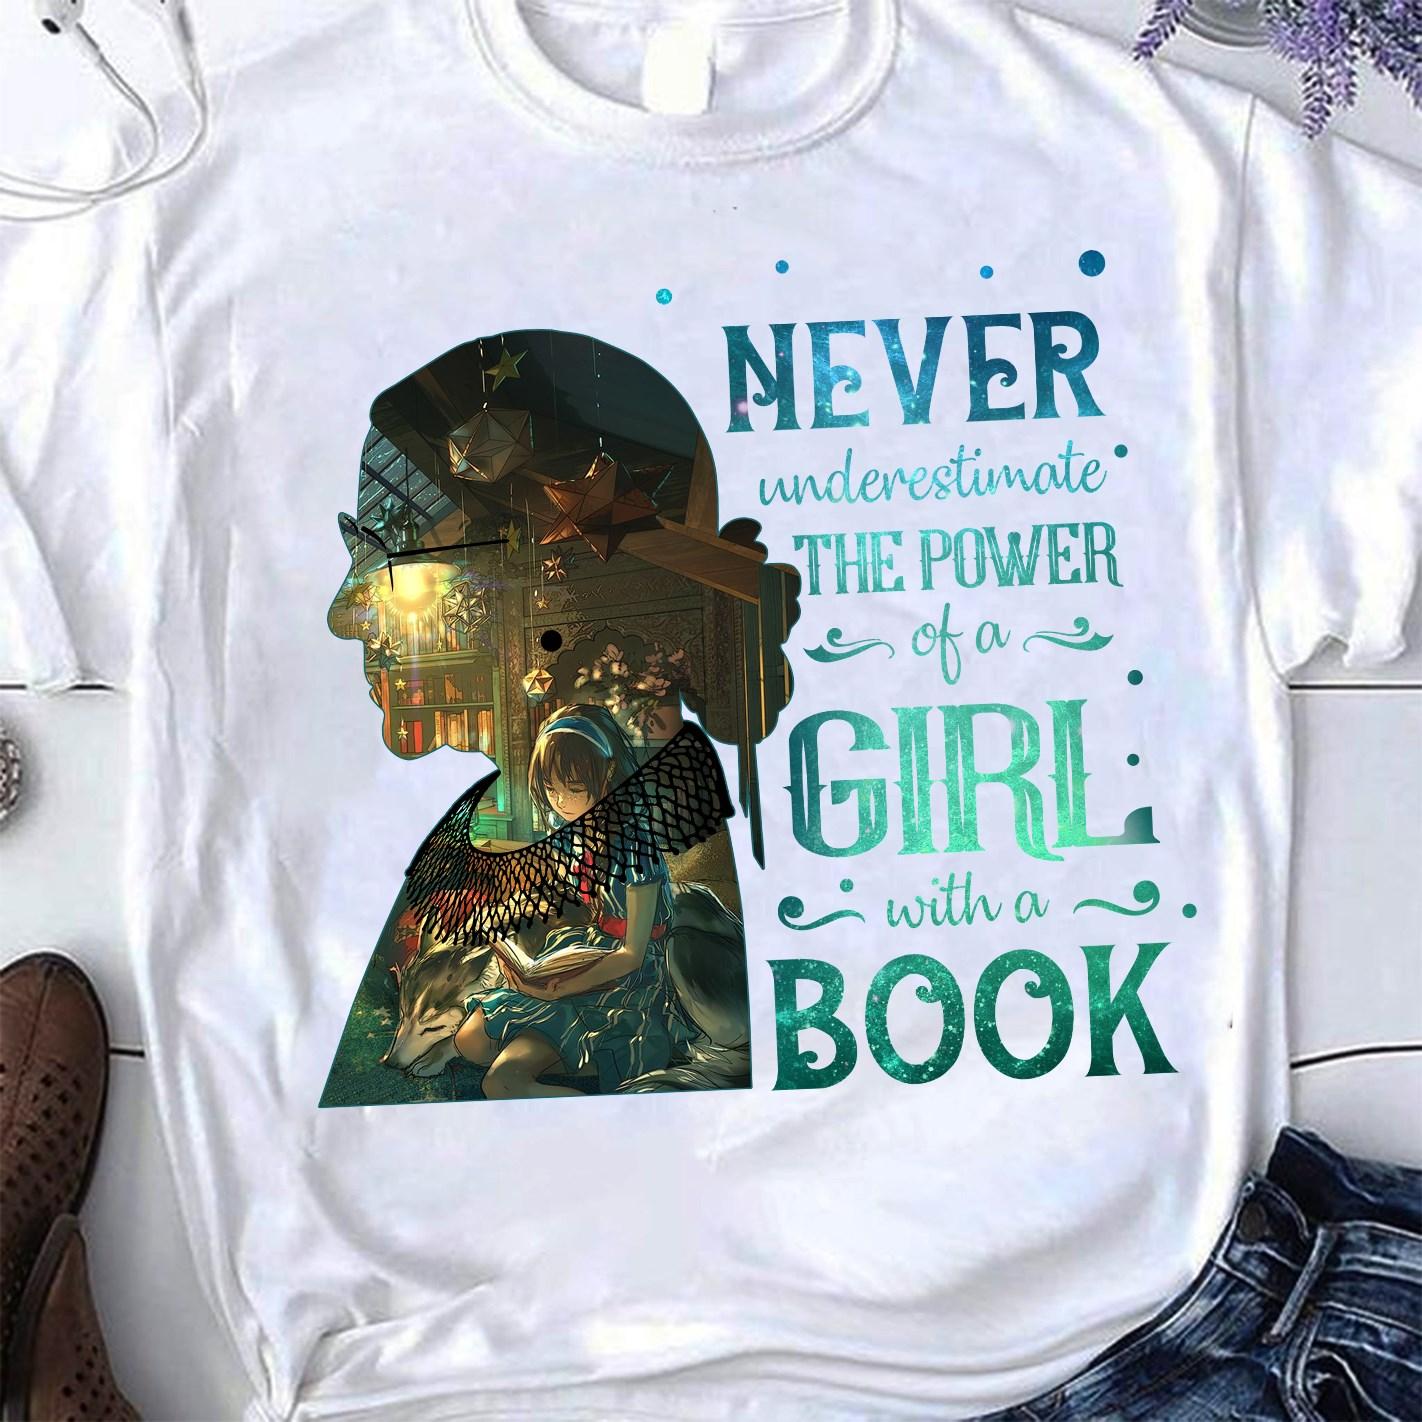 Never underestimate the power of a girl with a book - Girl loves reading books, bookaholic women